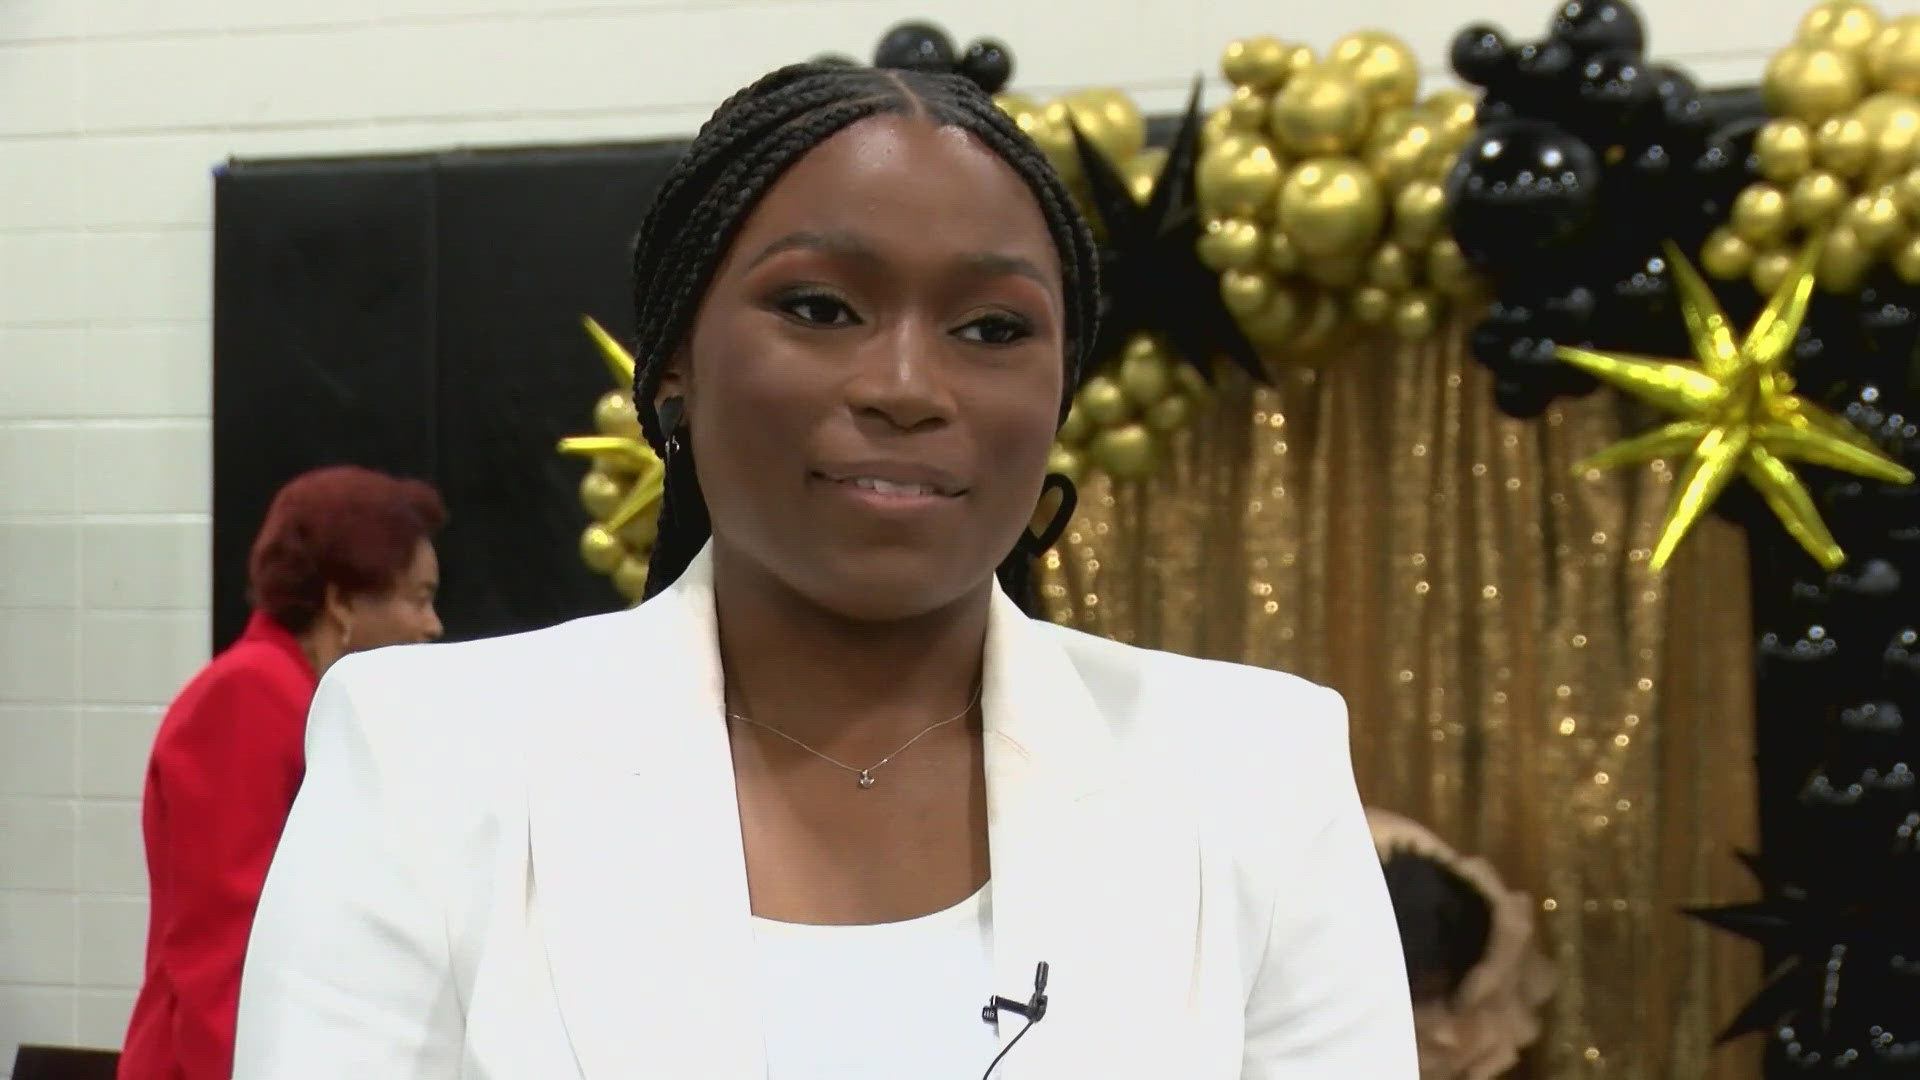 She said she applied to so many schools to show other students from low-income backgrounds what's possible